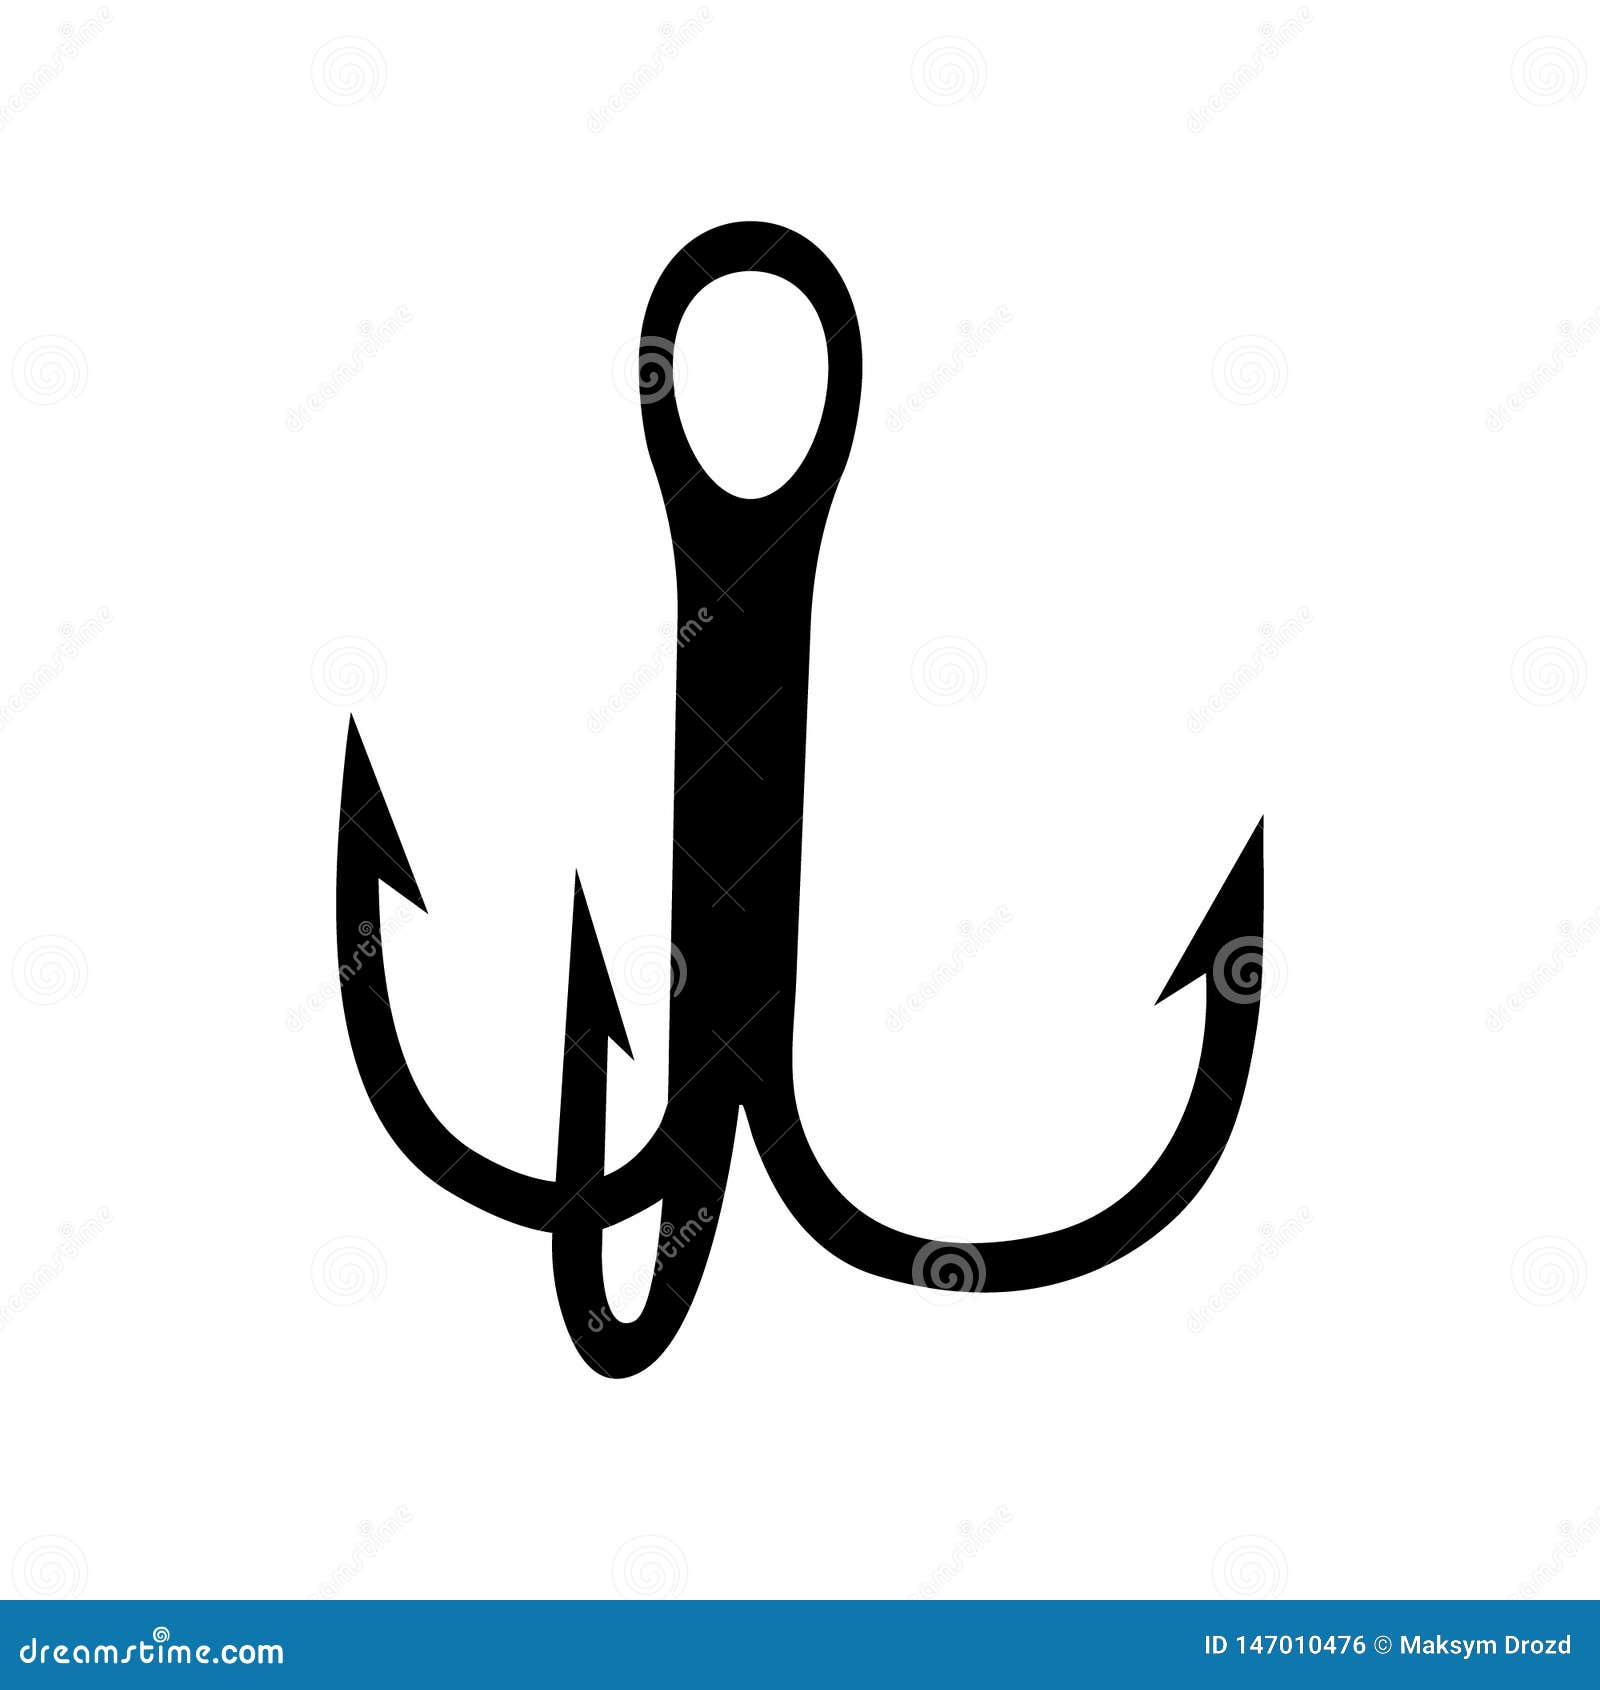 Download 37+ Fish Hook Svg Free Gif Free SVG files | Silhouette and ...